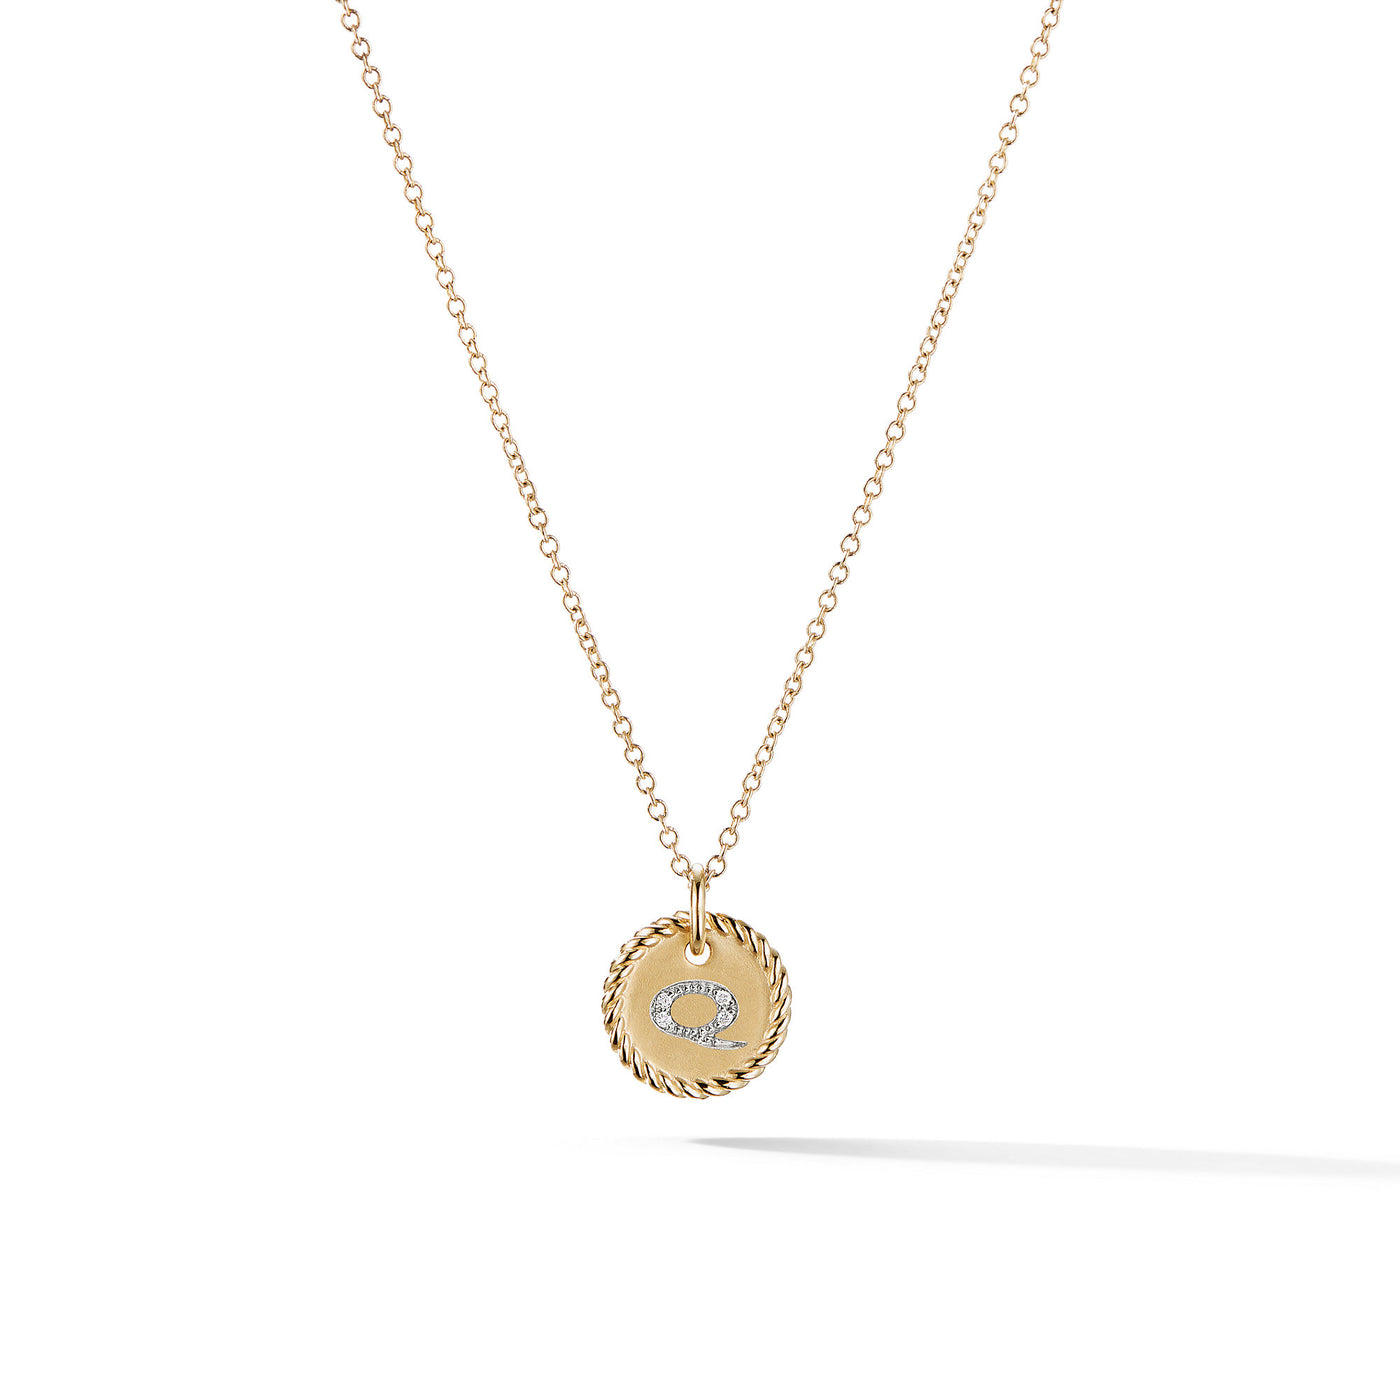 Initial Charm Necklace in 18K Yellow Gold with Diamond Q